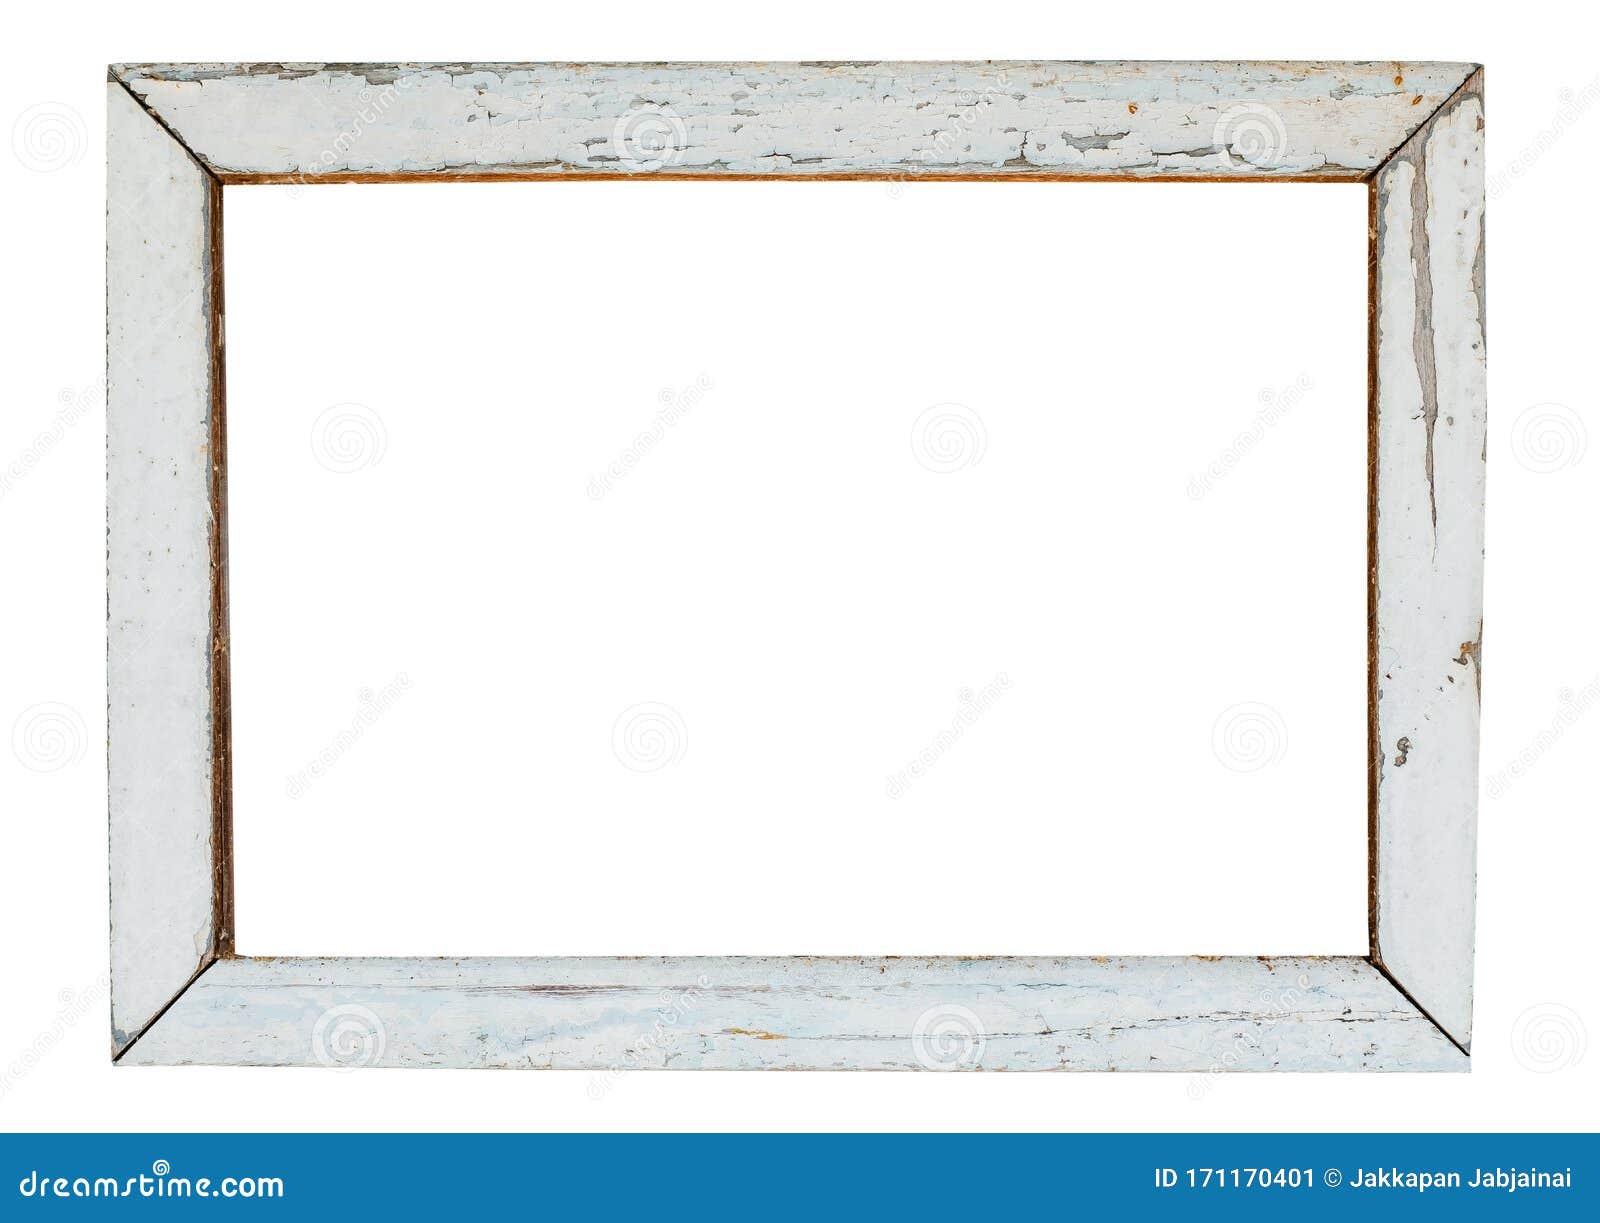 3,670 Scratched White Wood Paint Stock Photos - Free & Royalty-Free Stock  Photos from Dreamstime